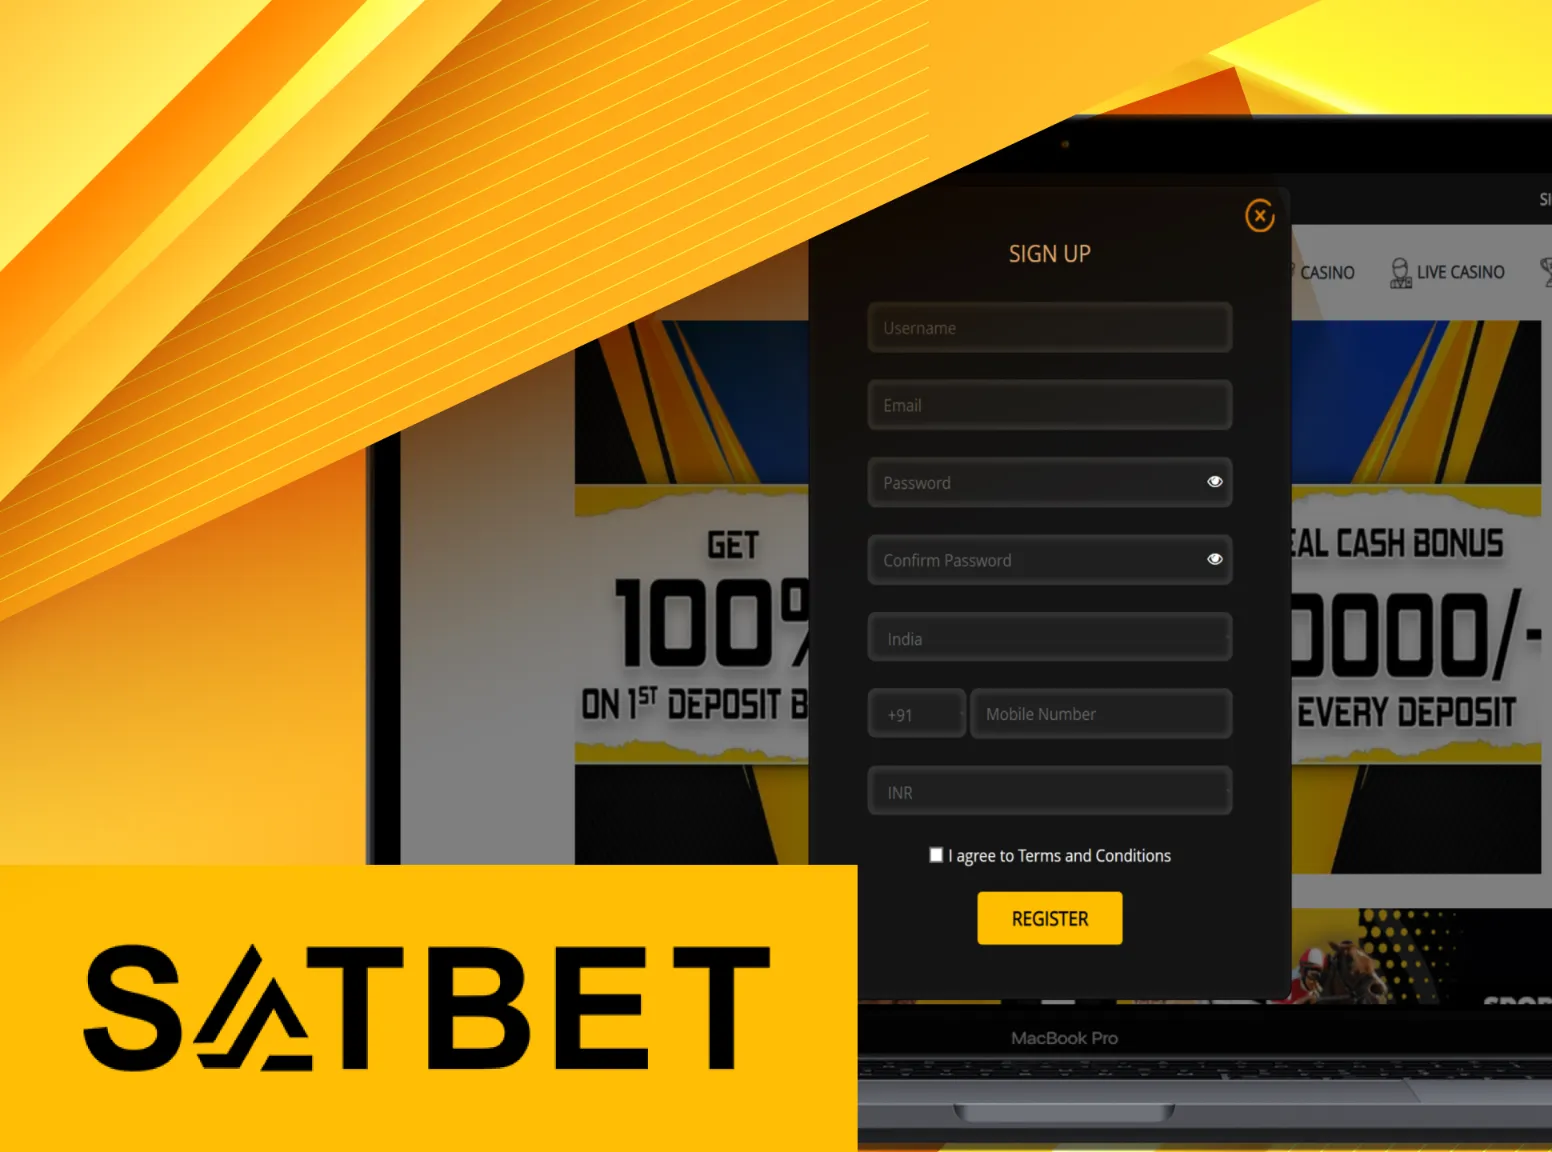 Register your new Satbet account by visiting special page.